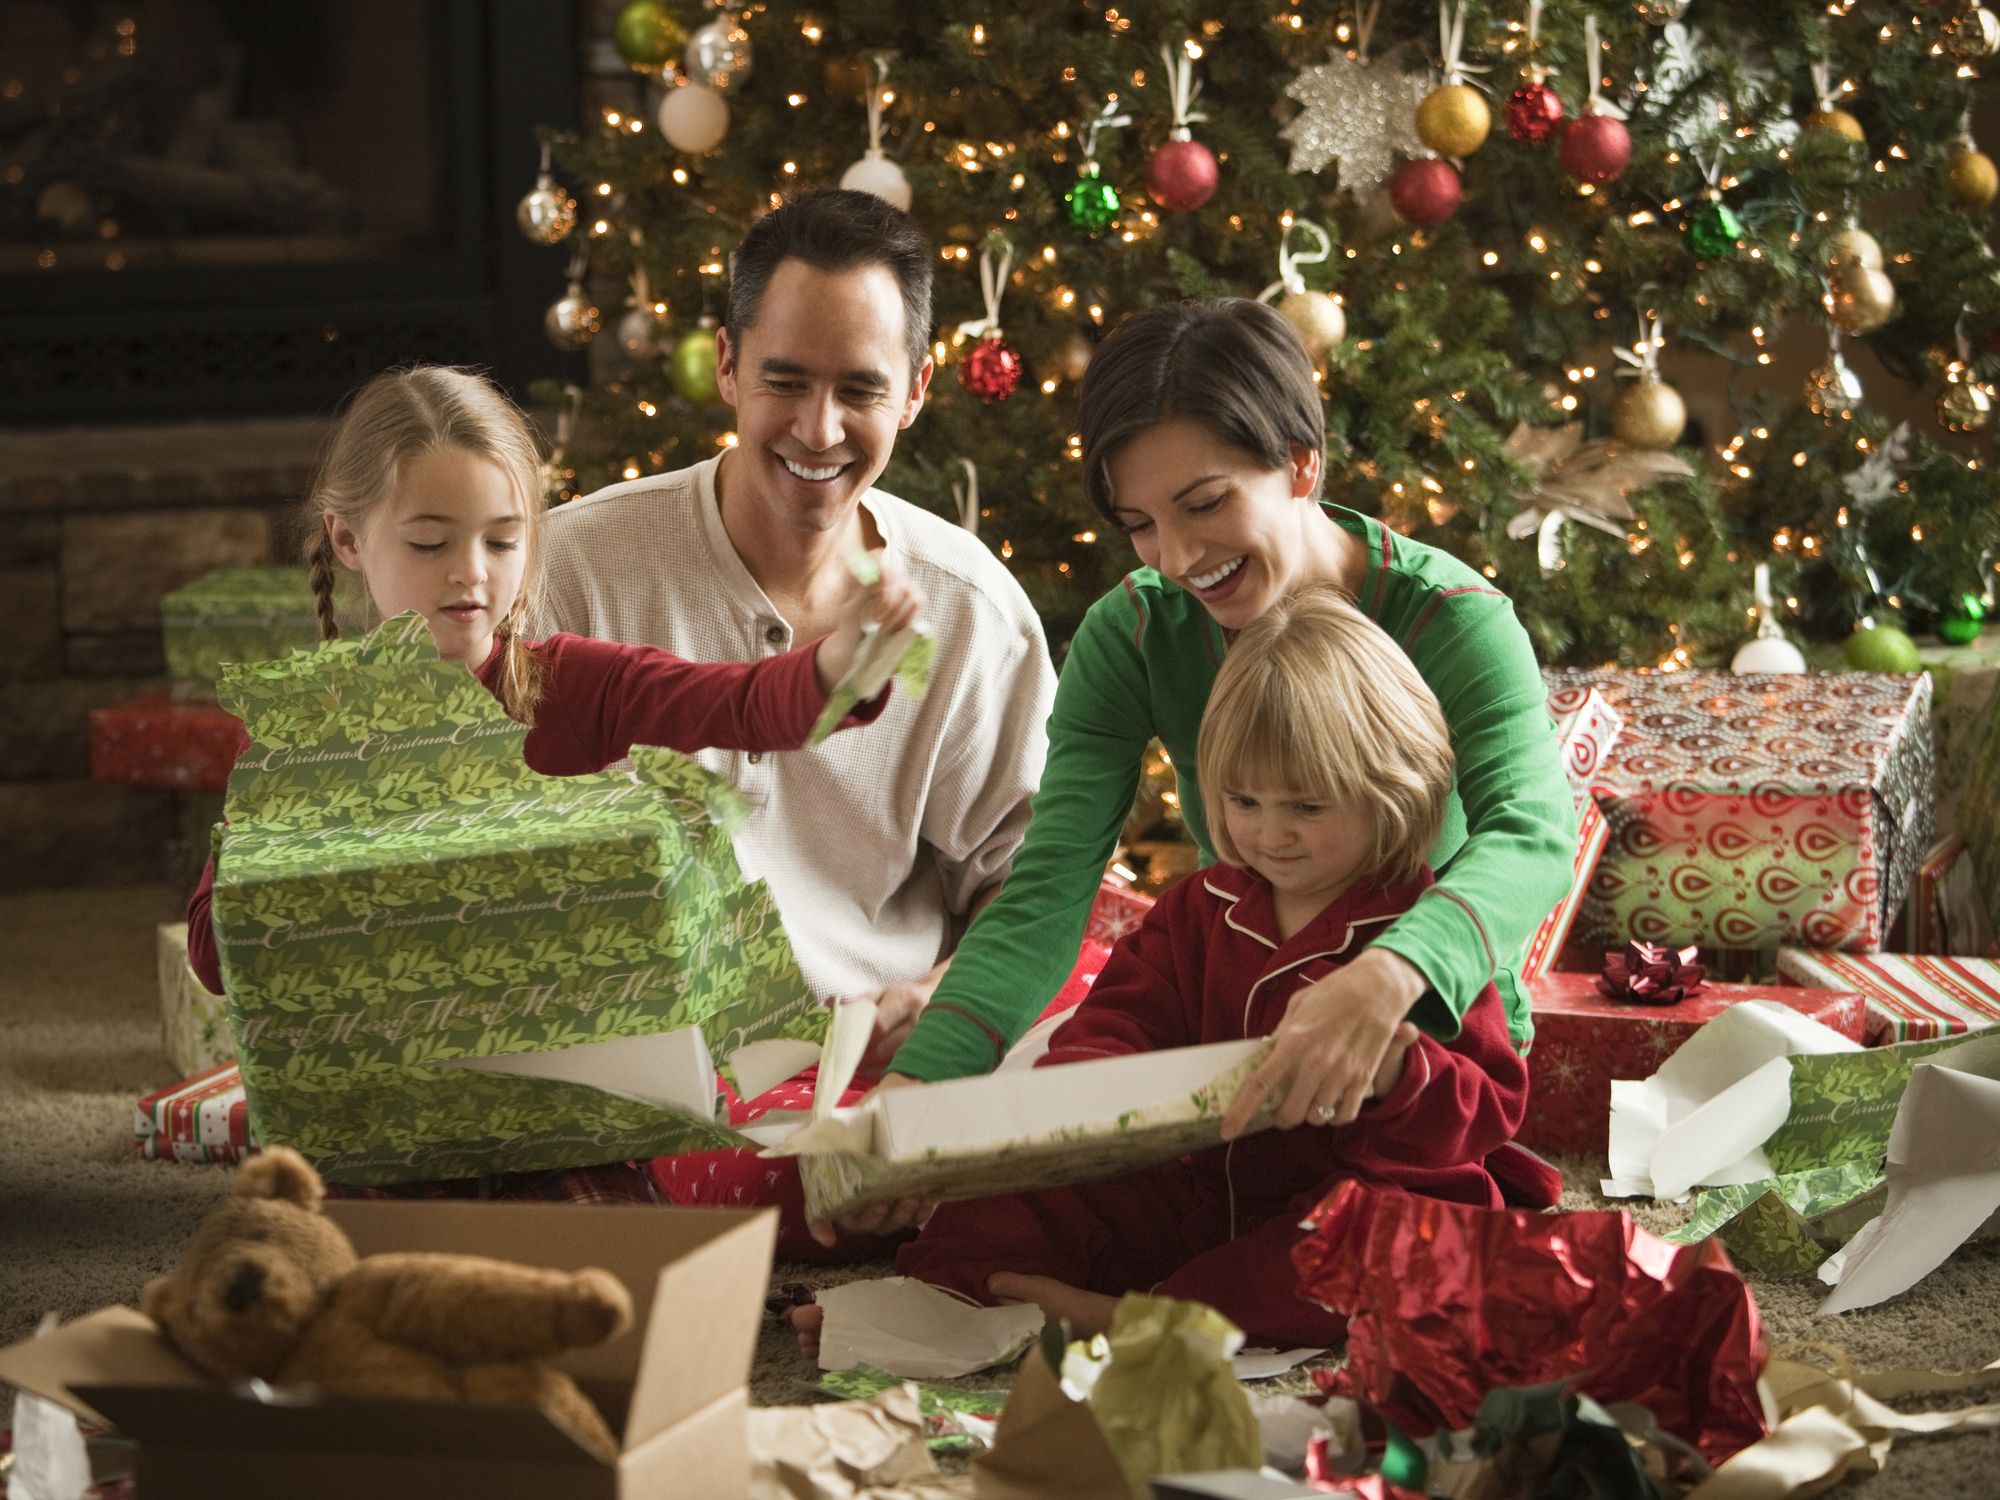 https://hips.hearstapps.com/hmg-prod/images/family-opening-christmas-presents-royalty-free-image-1704195154.jpg